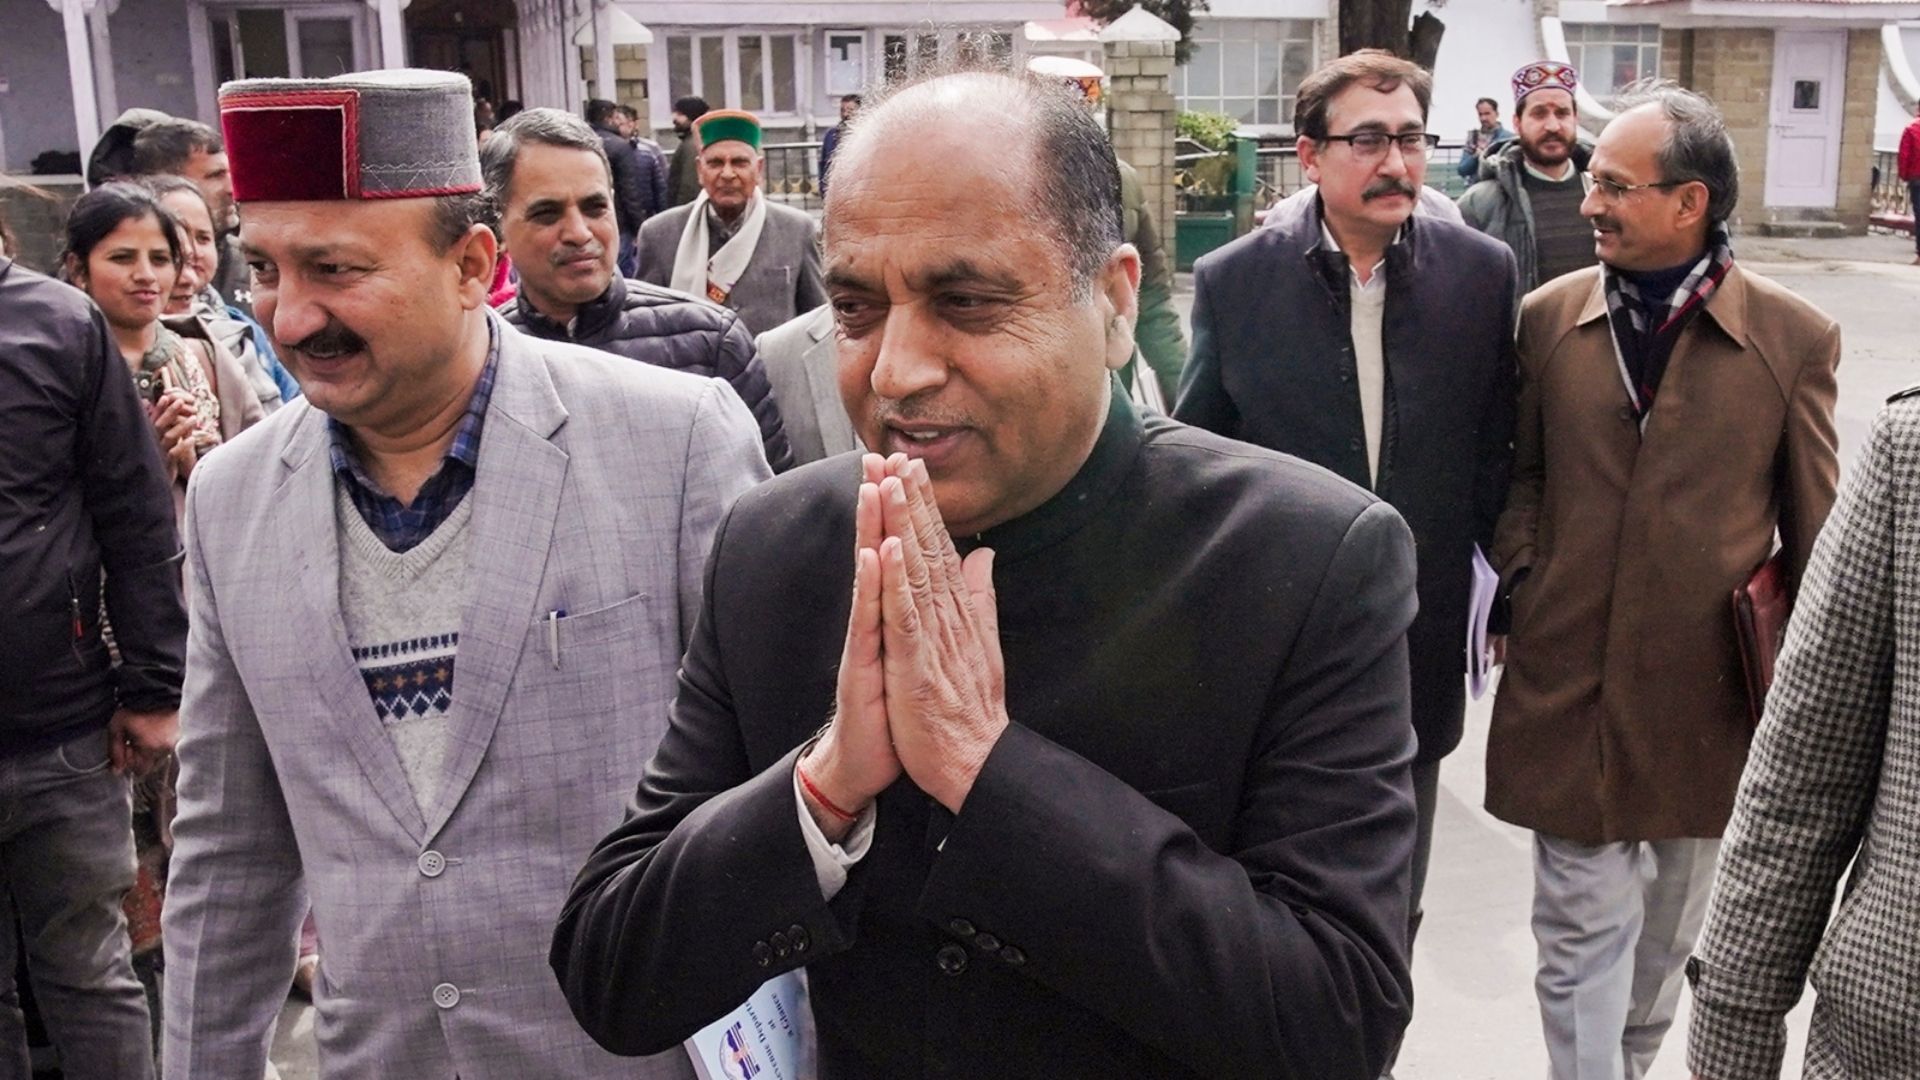 BJP’s Jairam Thakur Accuses Congress Party Of Lying; Says Congress Has Made A Record In Himachal Pradesh